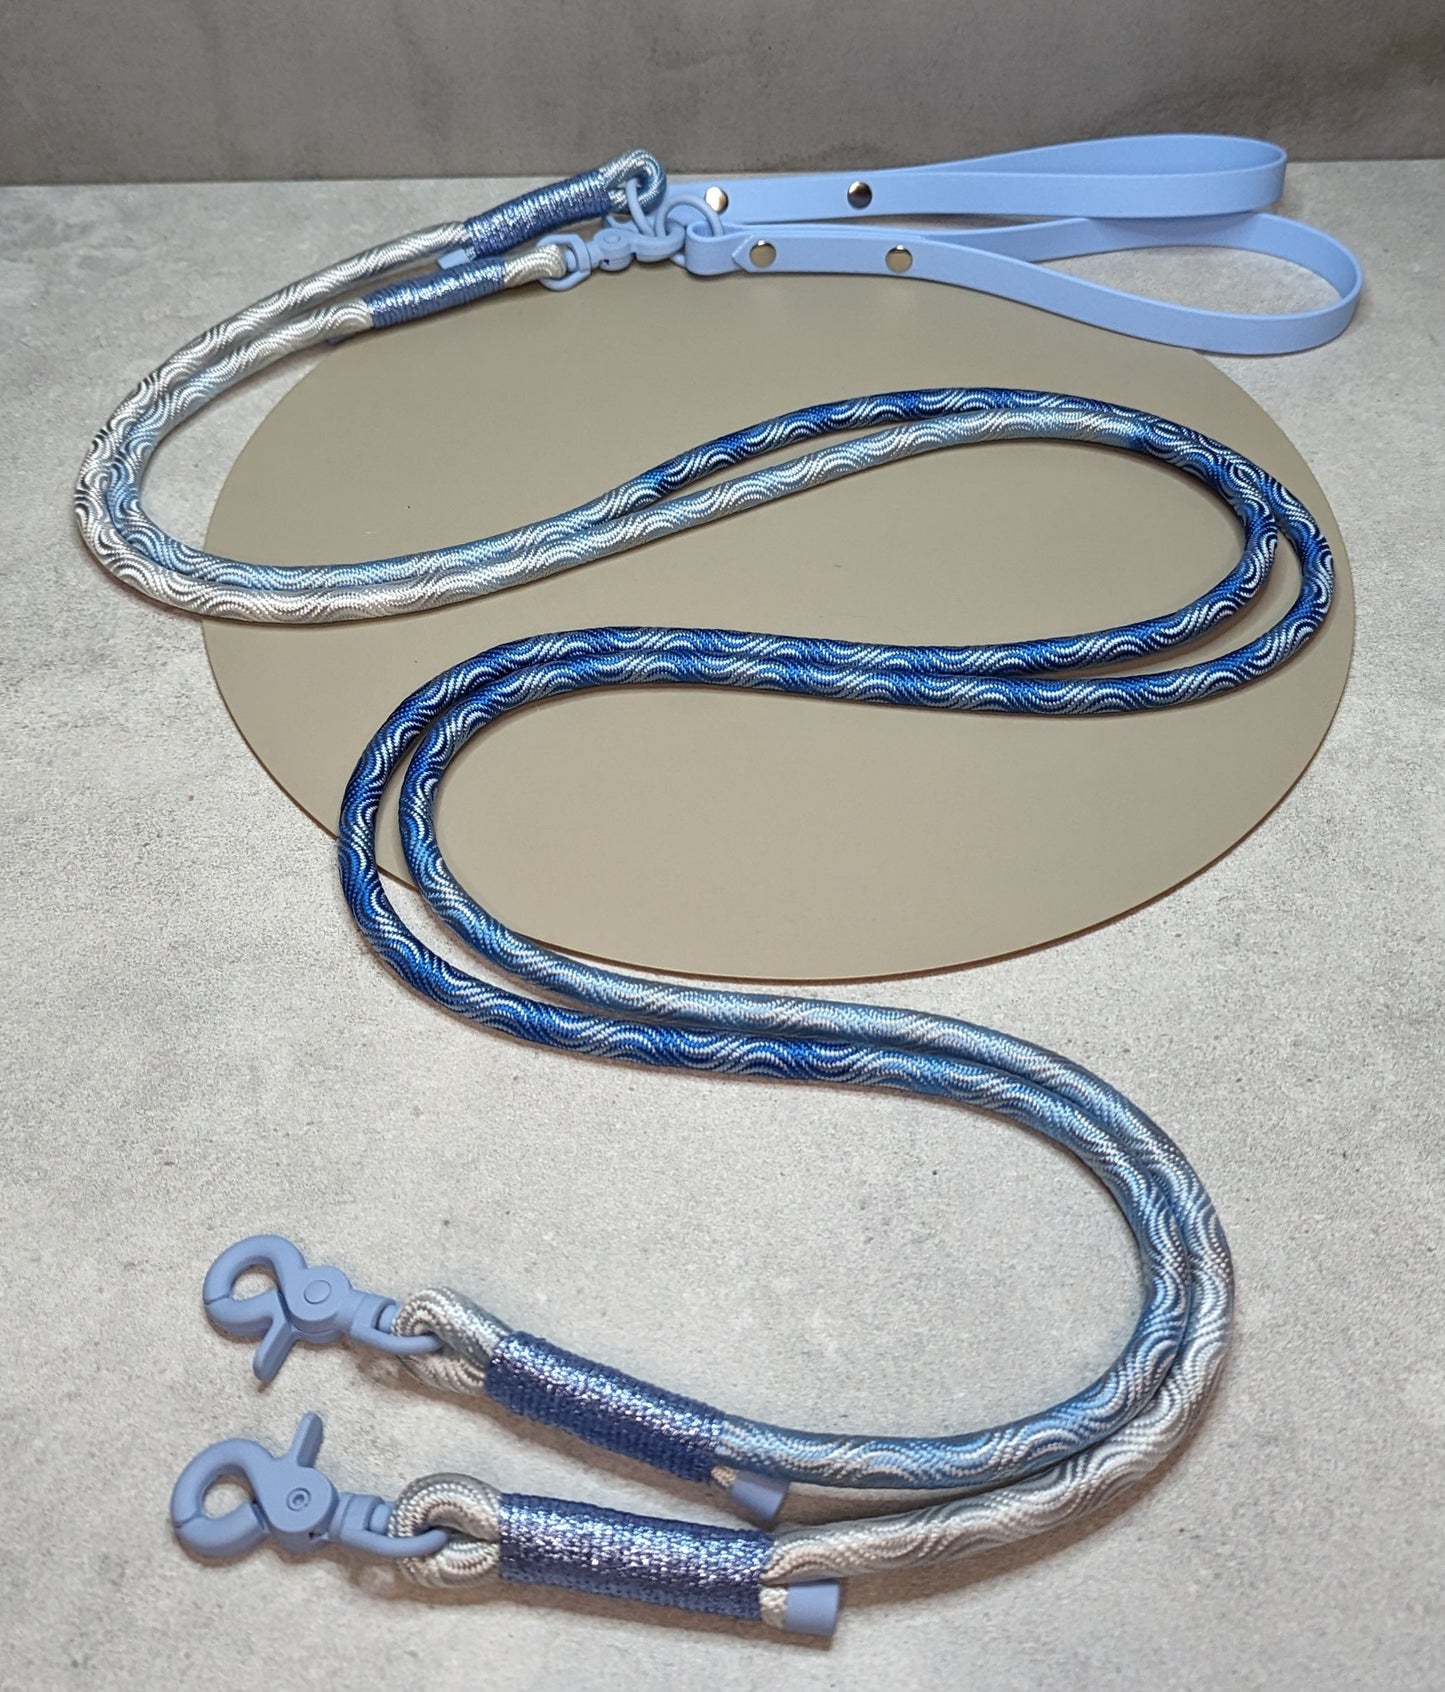 DUO - split rope lead with biothane handle - Design your own